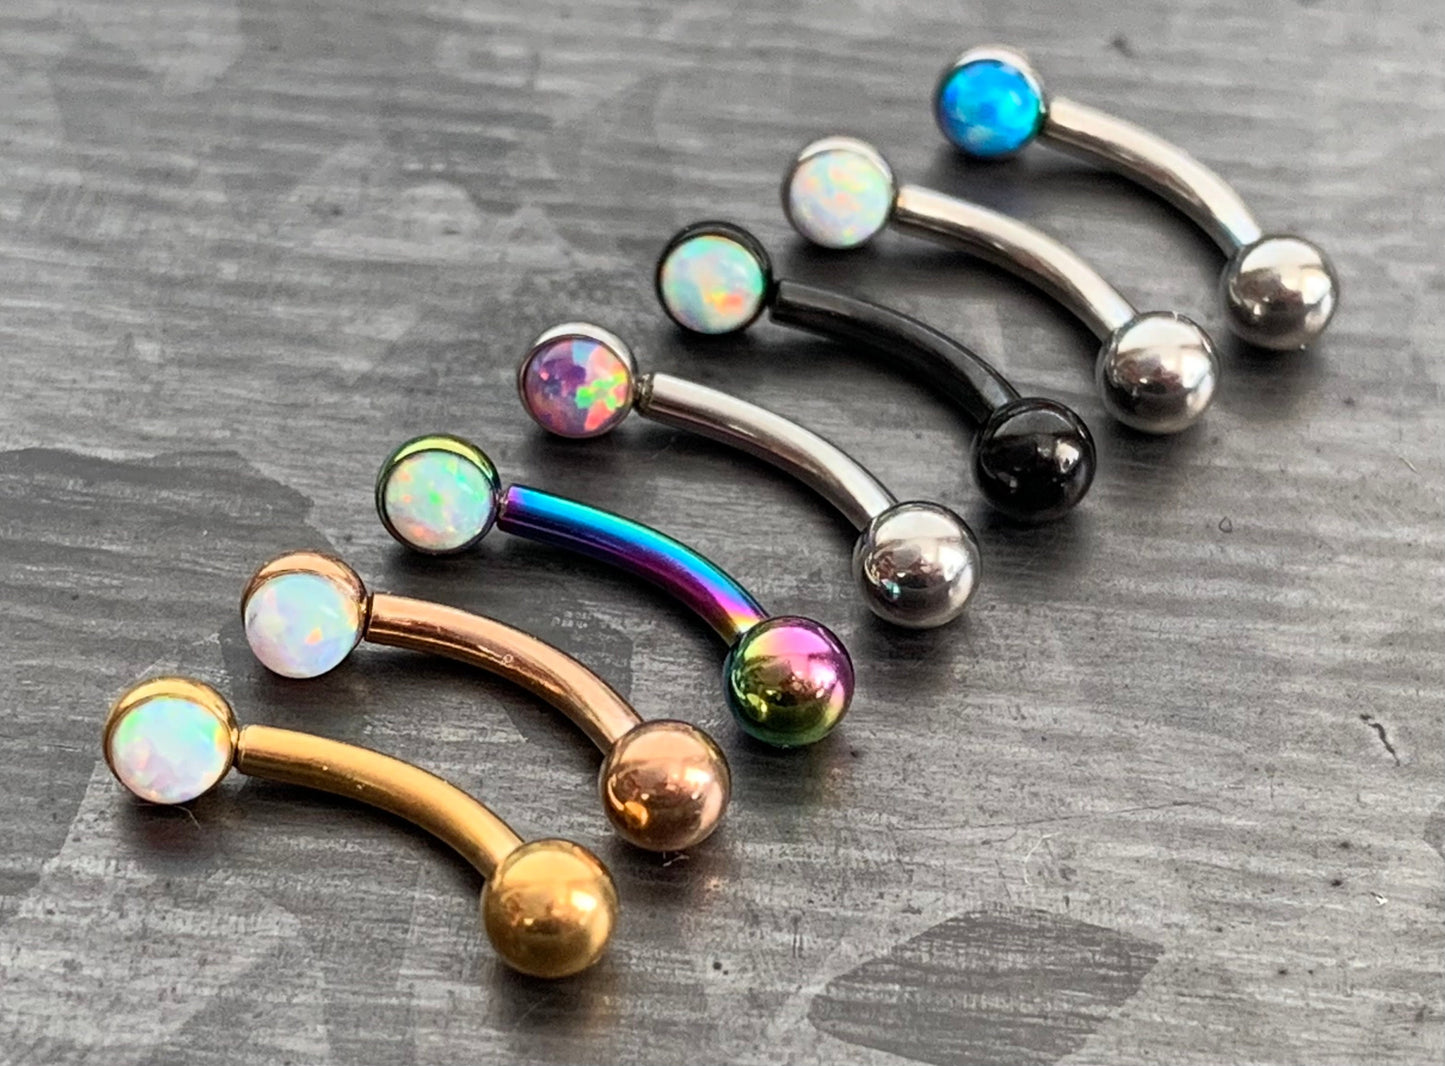 1 Piece Stunning Flat Back Set 3mm Opal Curved Barbell Eyebrow Ring - 16g - Blue, Purple, White, Gold, Rose Gold and Multi-Color Available!